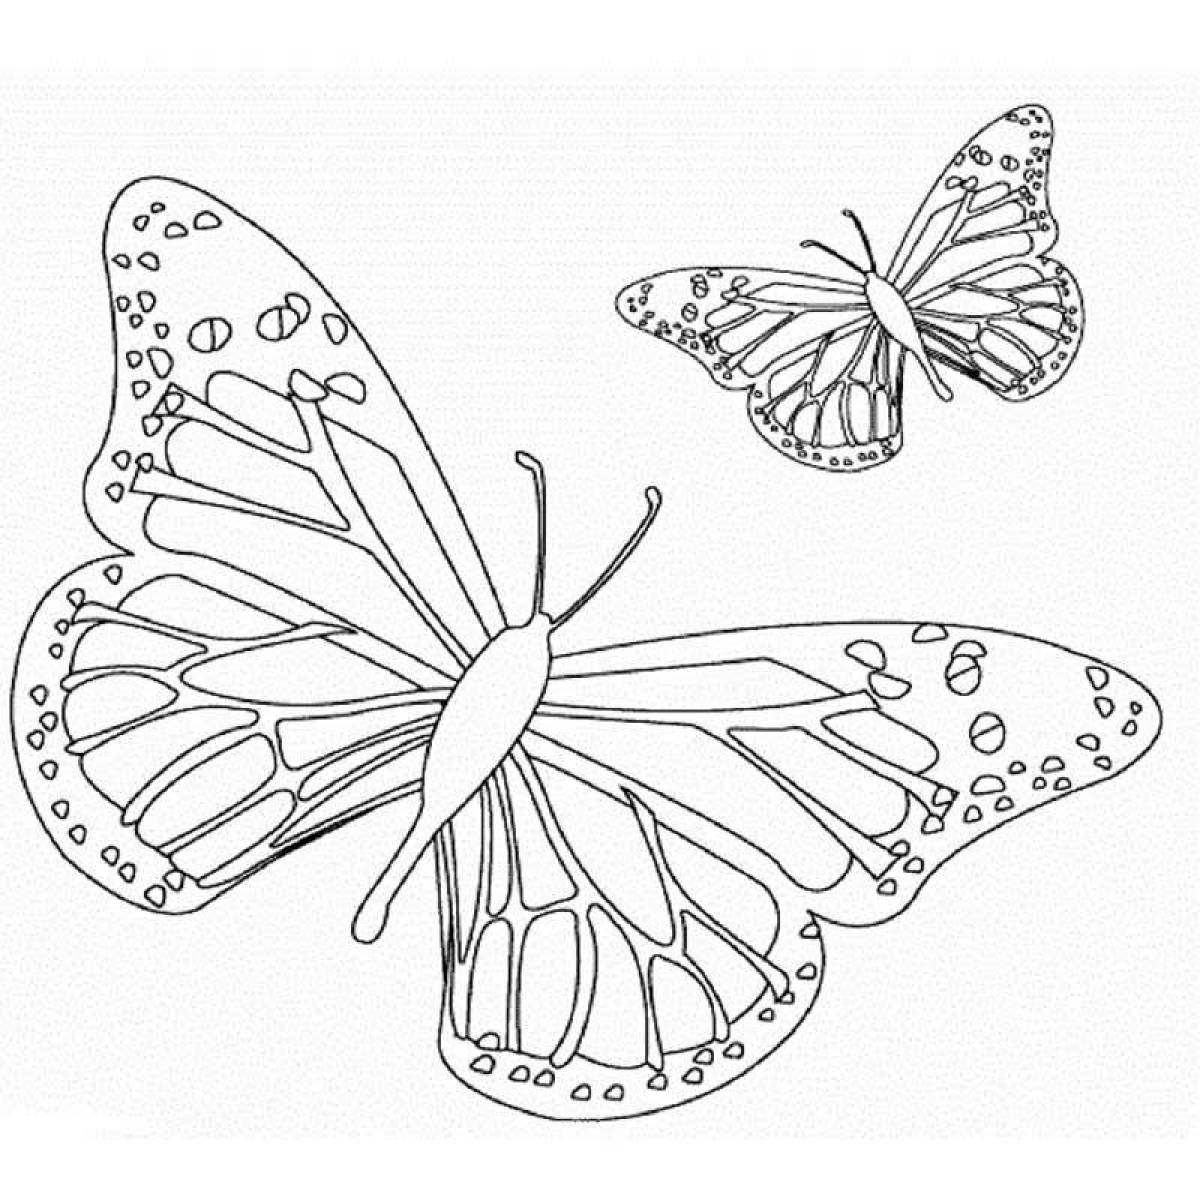 Coloring book awesome butterfly pattern